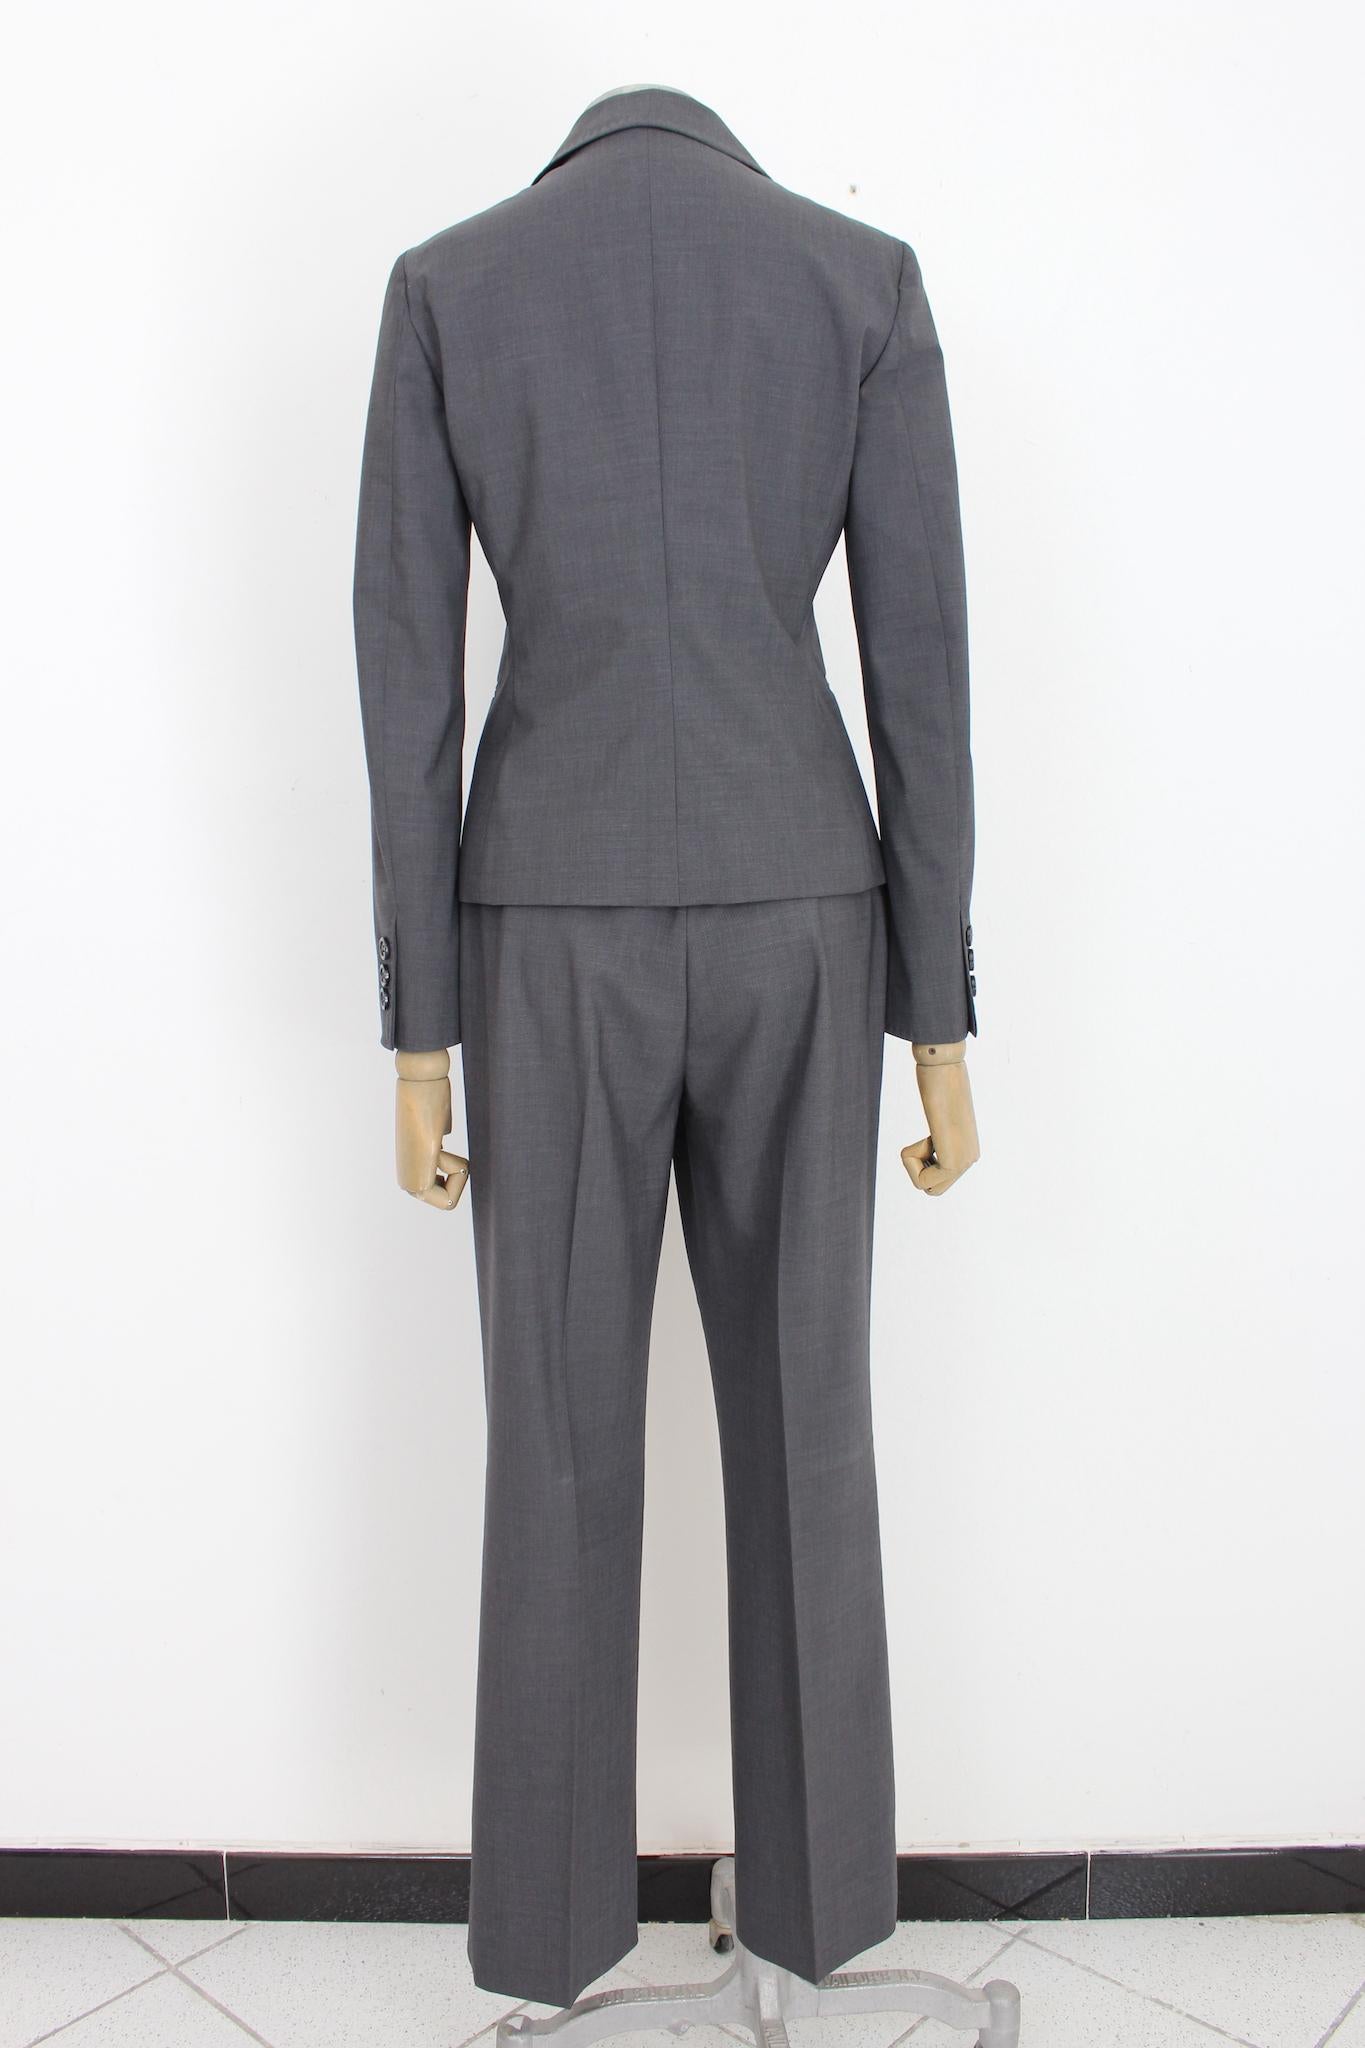 Classic Moschino Cheap and Chic 2000s pants suit. Slim fit model jacket with knots on the neck, classic straight leg trousers. Gray color, fabric 95% wool, 5% other fibers. Made in Italy.

Size: 42 It 8 Us 10 Uk

Shoulder: 42 cm
Bust / Chest: 46